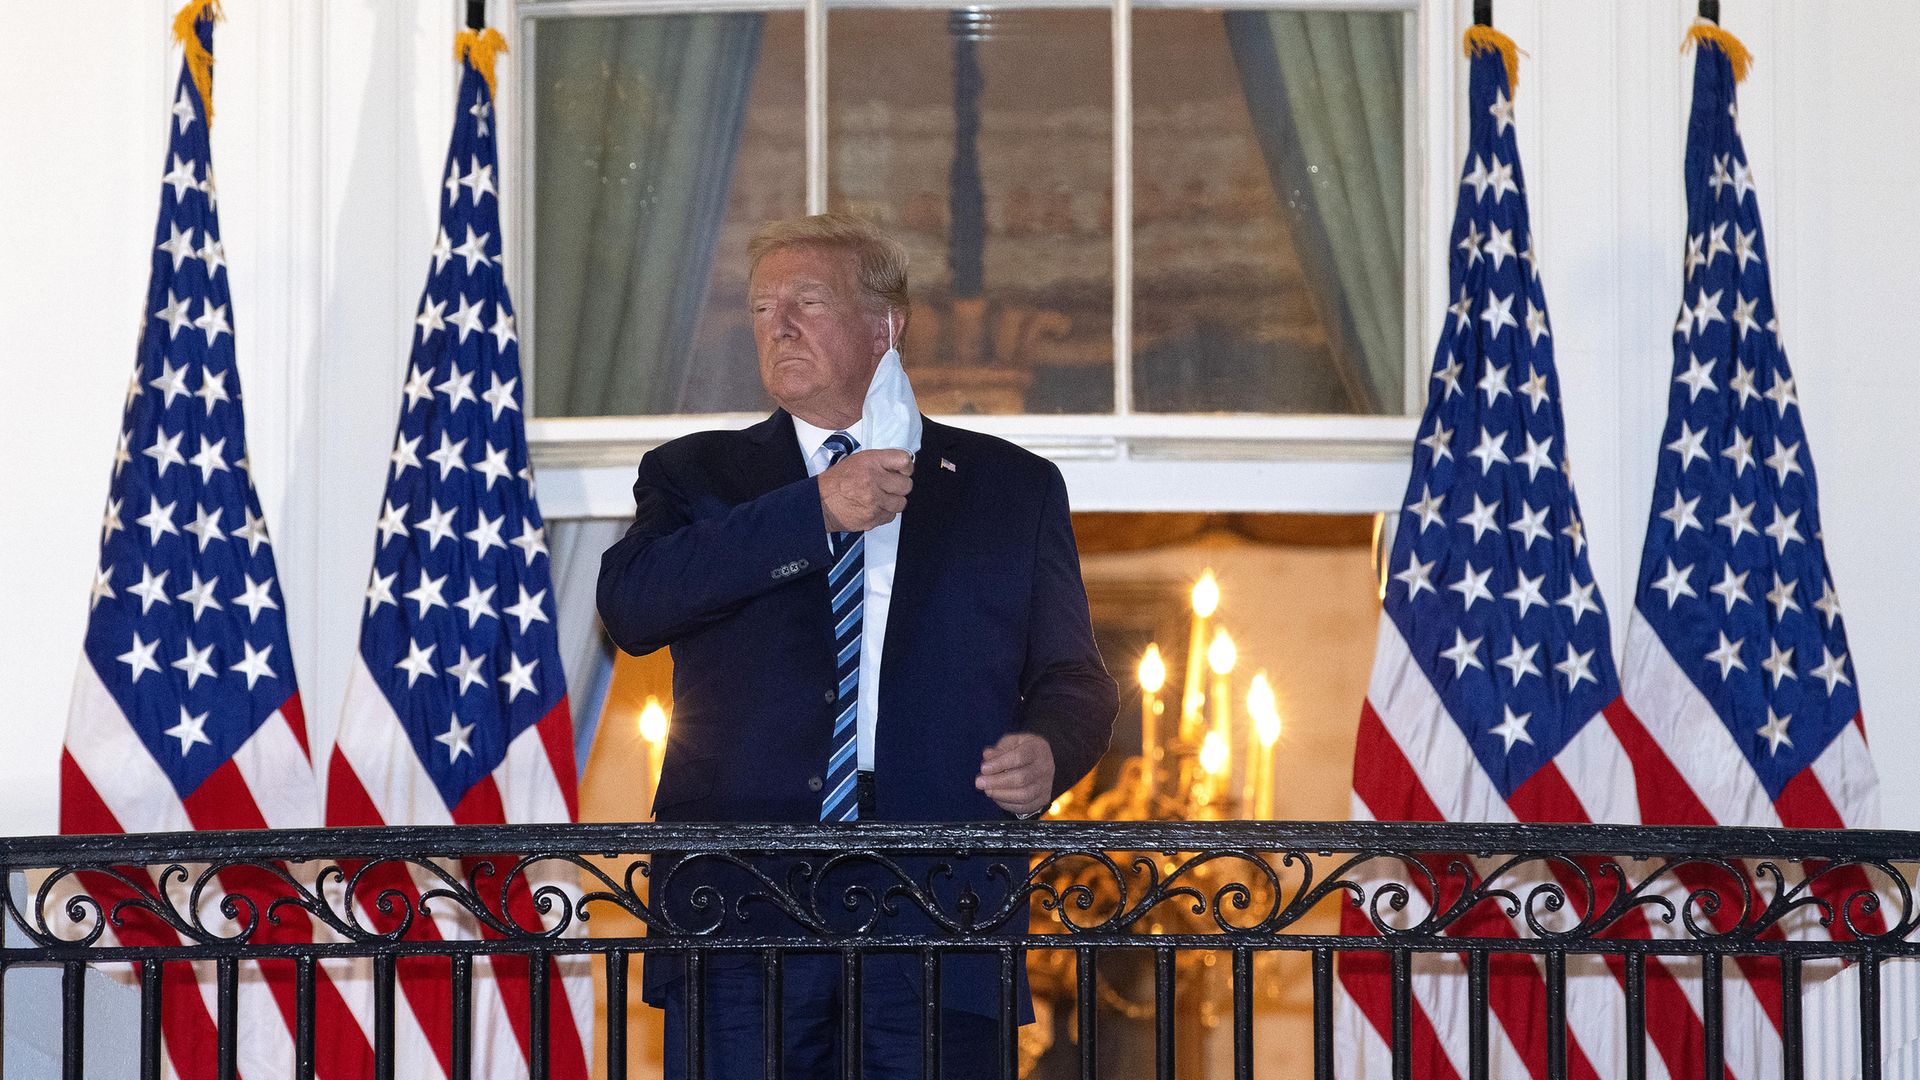 Donald Trump removes his mask upon return to the White House from hospital. Trump spent three days hospitalized for coronavirus. - Credit: Getty Images